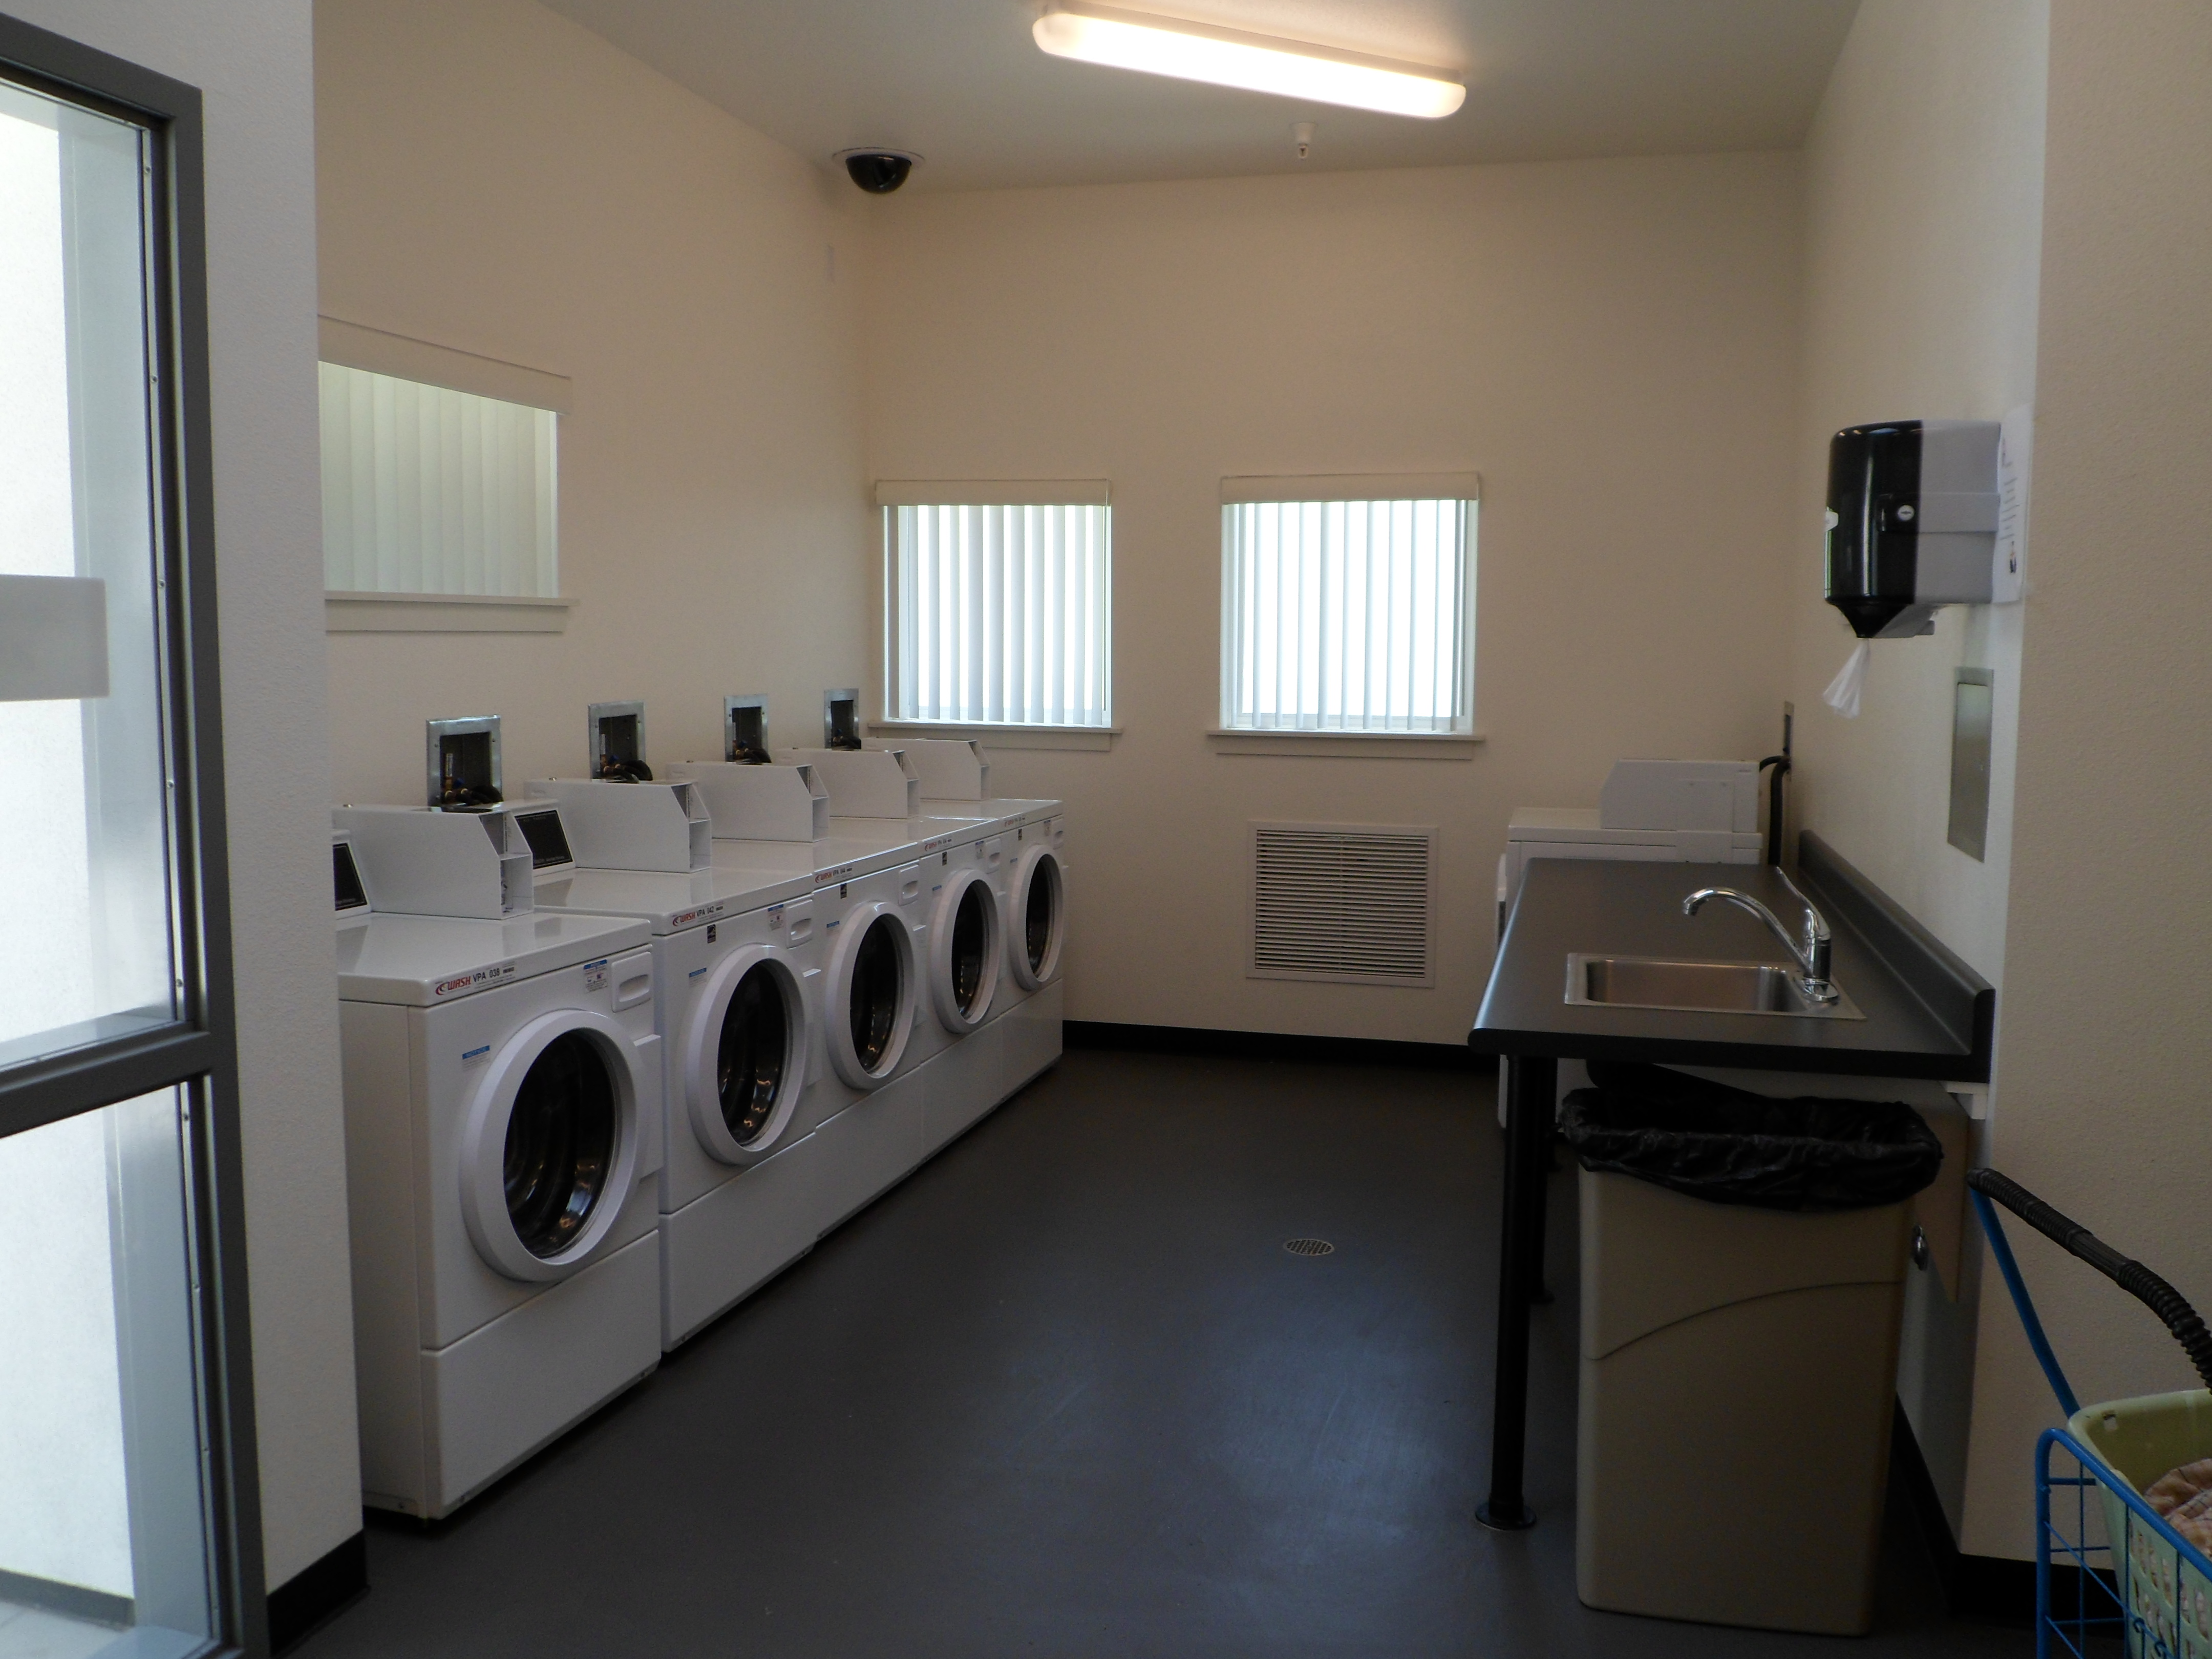 Interior view of a laundry room at Rio Vista Apartments. Five machines and a table and a sink with counter space